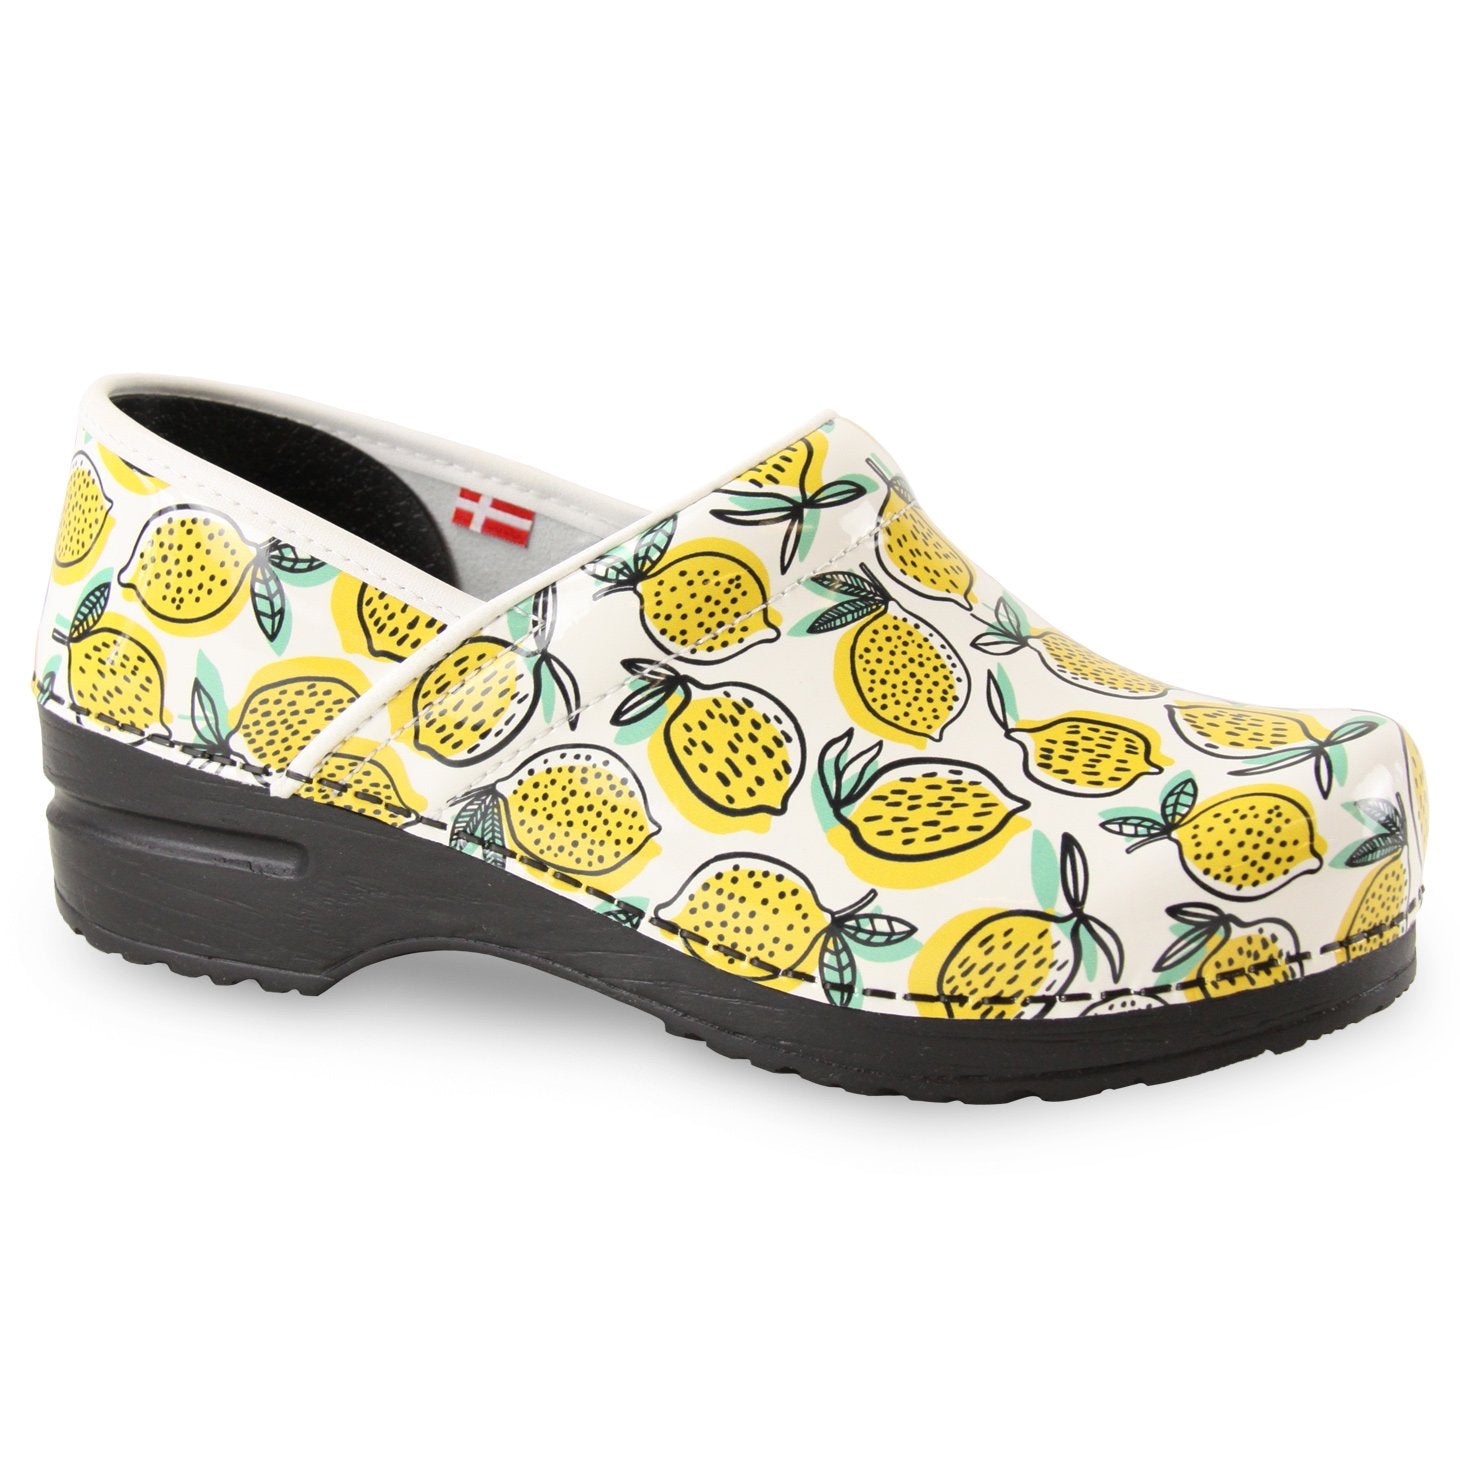 Sanita Rowe Women's in Yellow - avail. Spring '22 Closed Back Clog